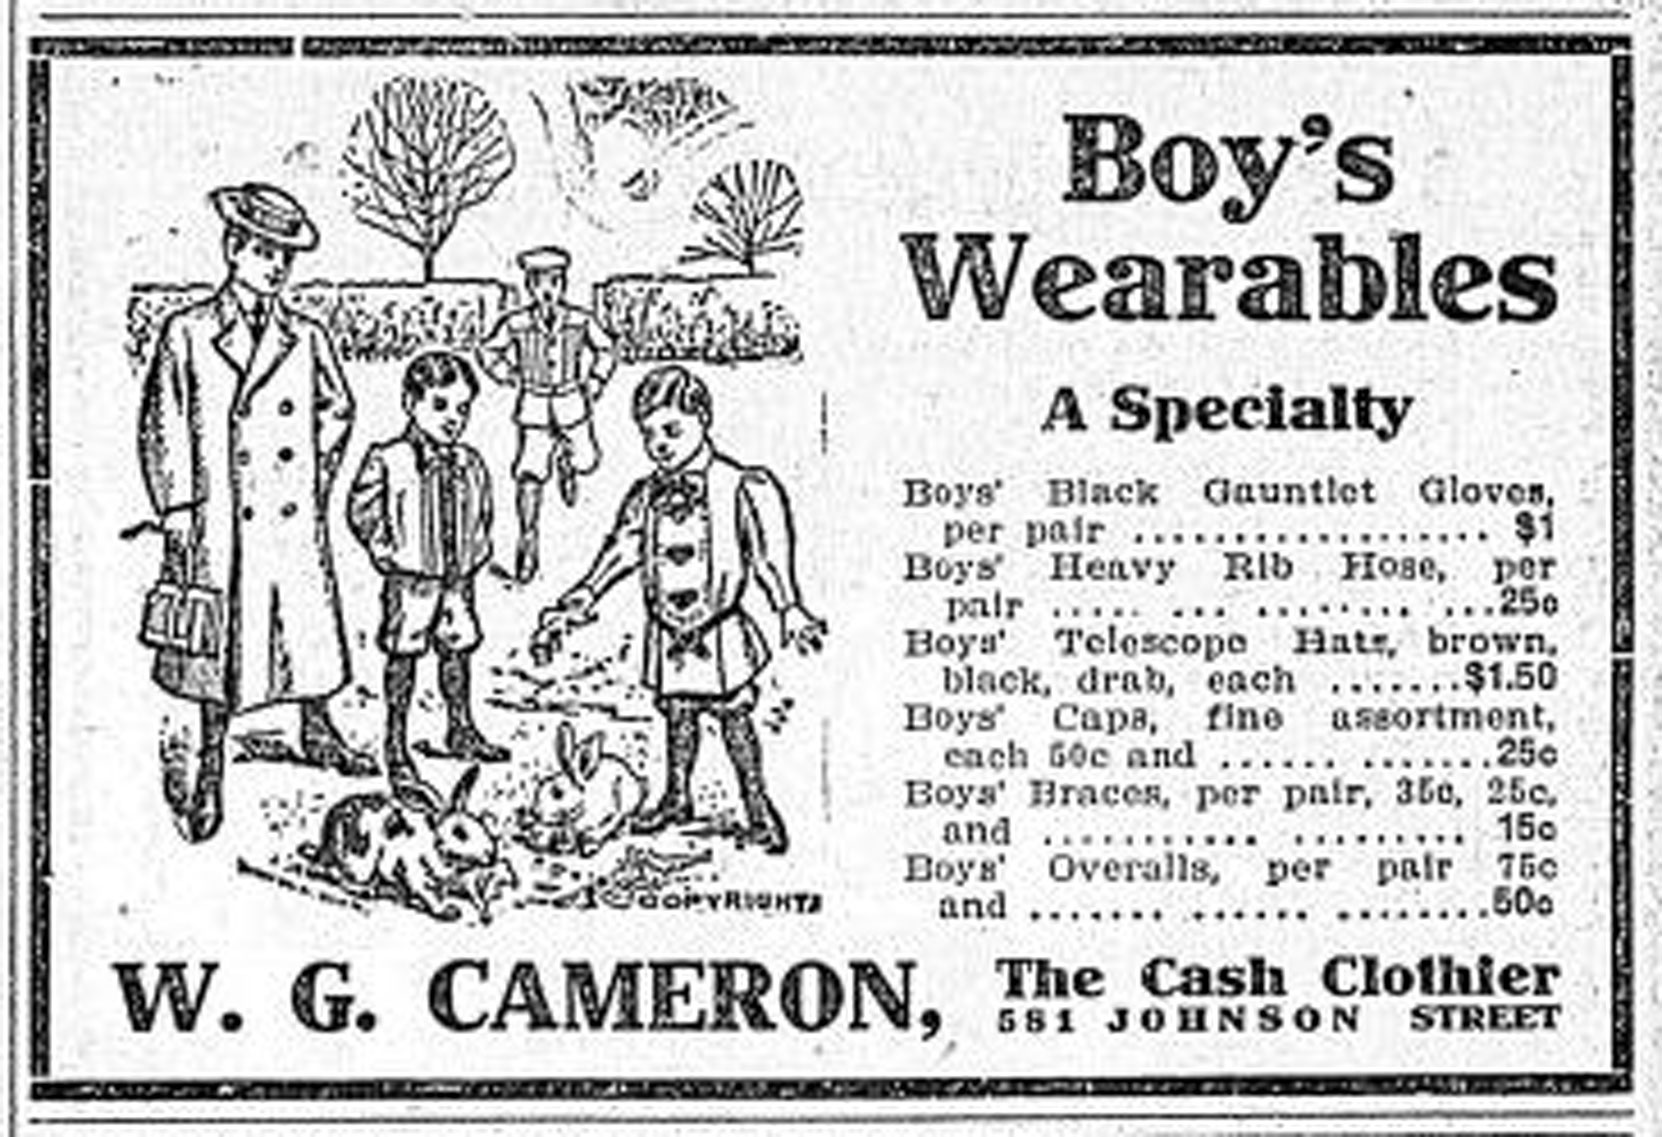 1910 advertisement for W.G. Cameron, 581 Johnson Street, (Victoria Online Sightseeing Tours collection)